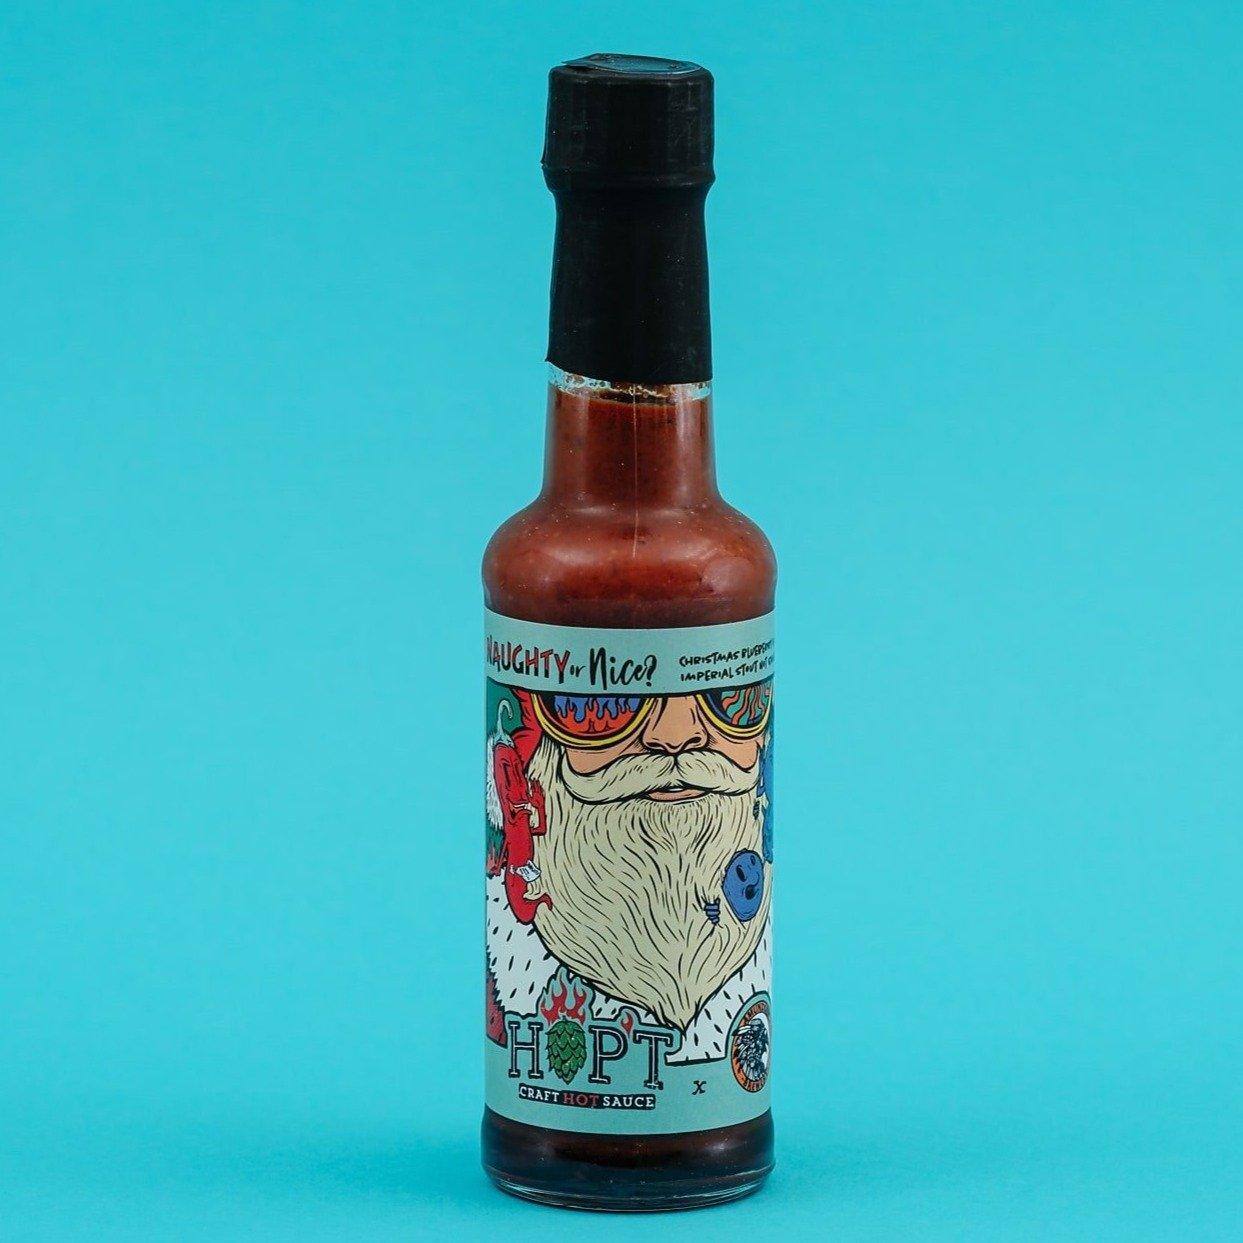 Naughty Or Nice | 150ml | Hopt Sauce | Hops Blueberry & Maple Syrup - One Stop Chilli Shop